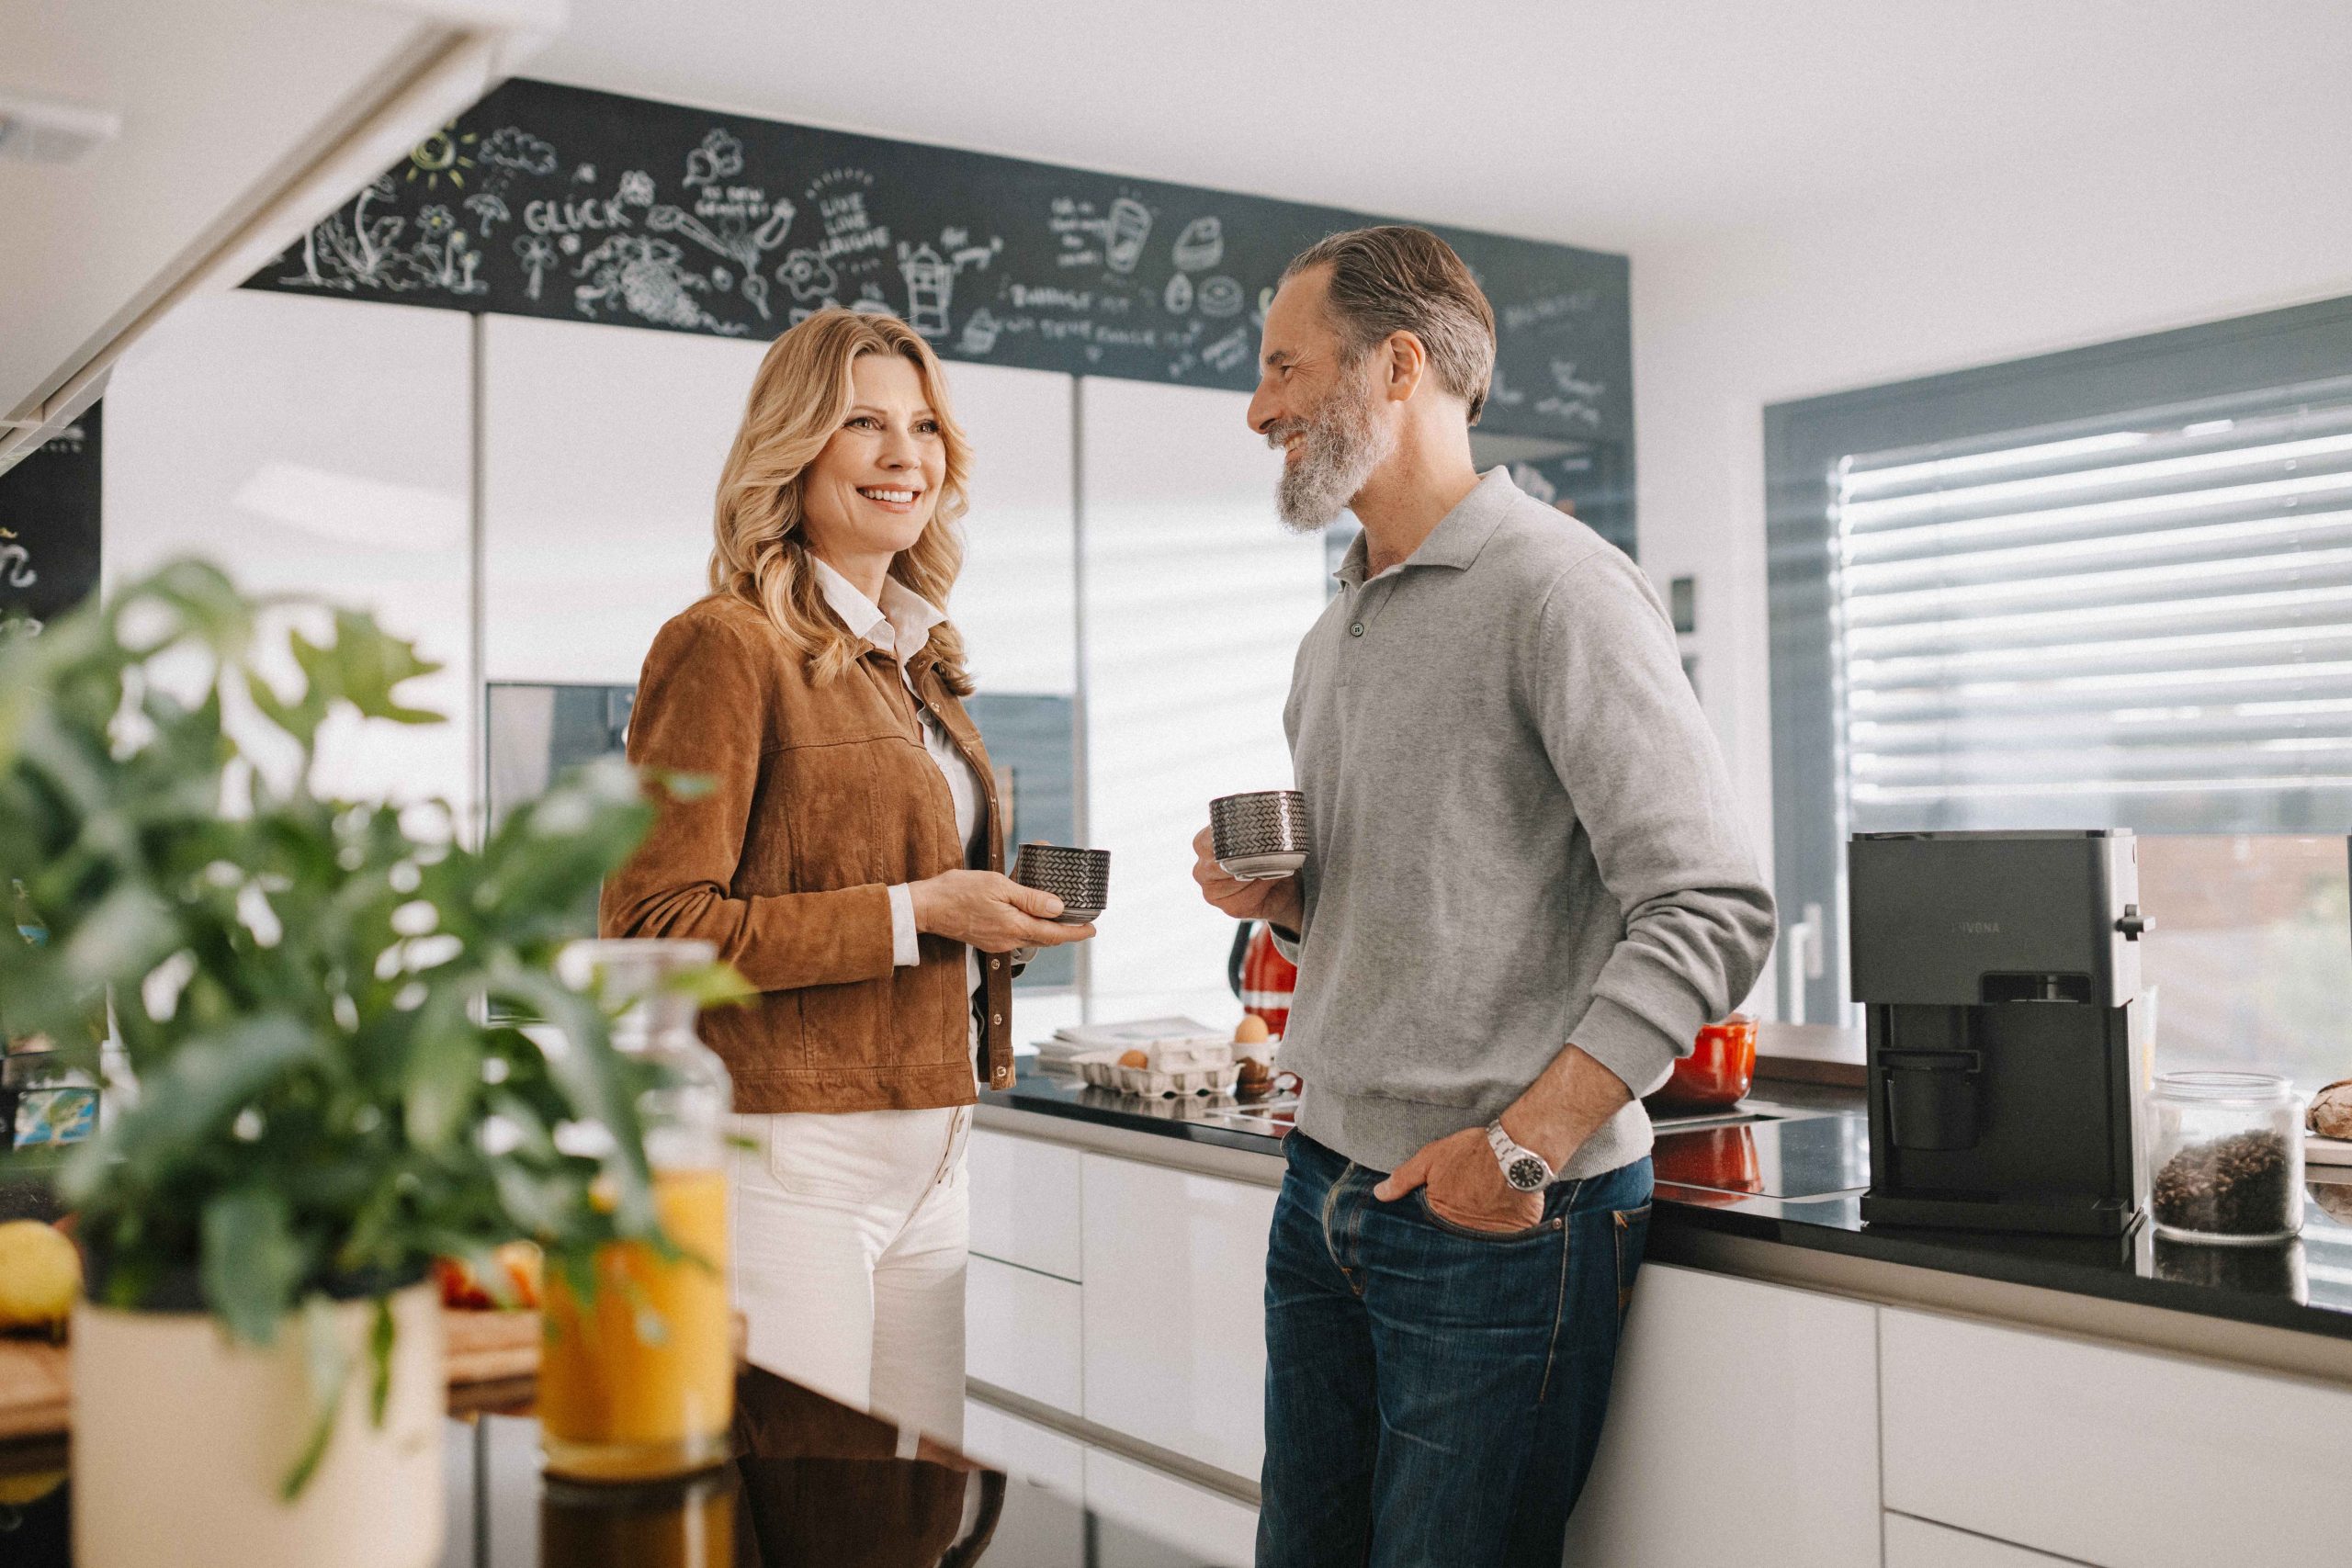 This picture was taken for a client called Nivona, who's a manufacturer for coffee machines. Two adults are standing in a modern kitchen holding coffee mugs. The coffee machine is standing next to them.